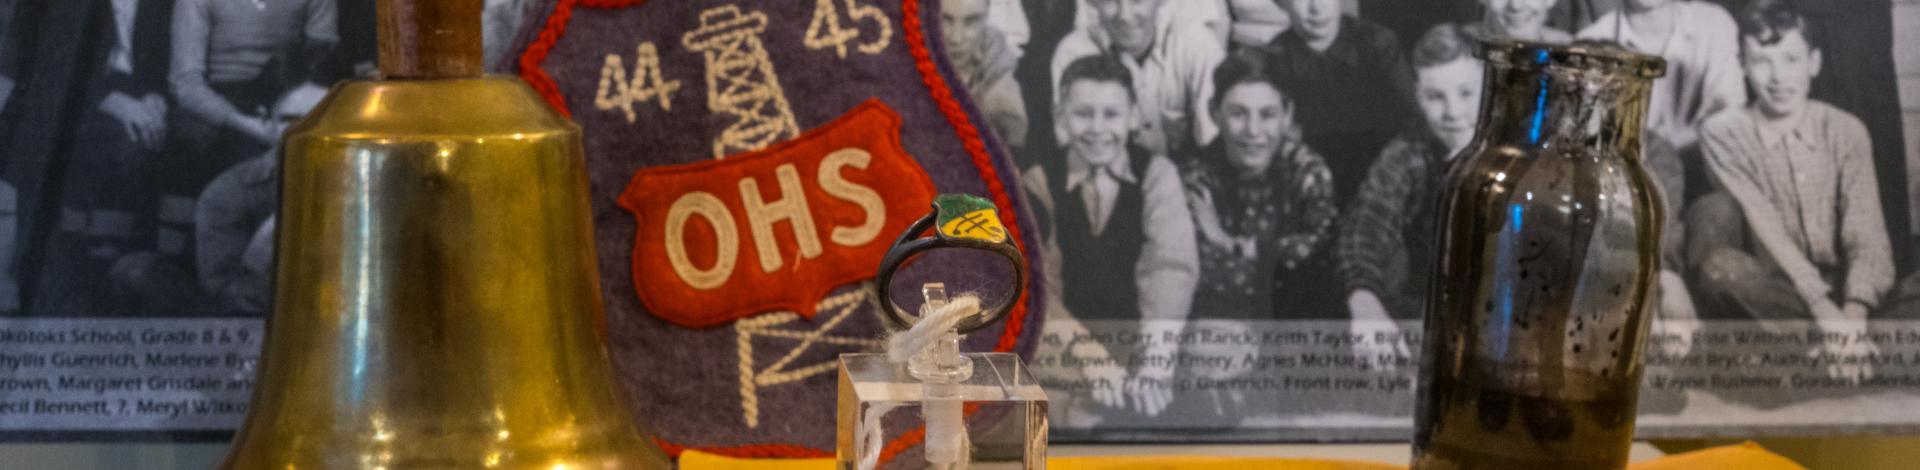 a photo of old school items including a class ring, old class photo and a hand bell